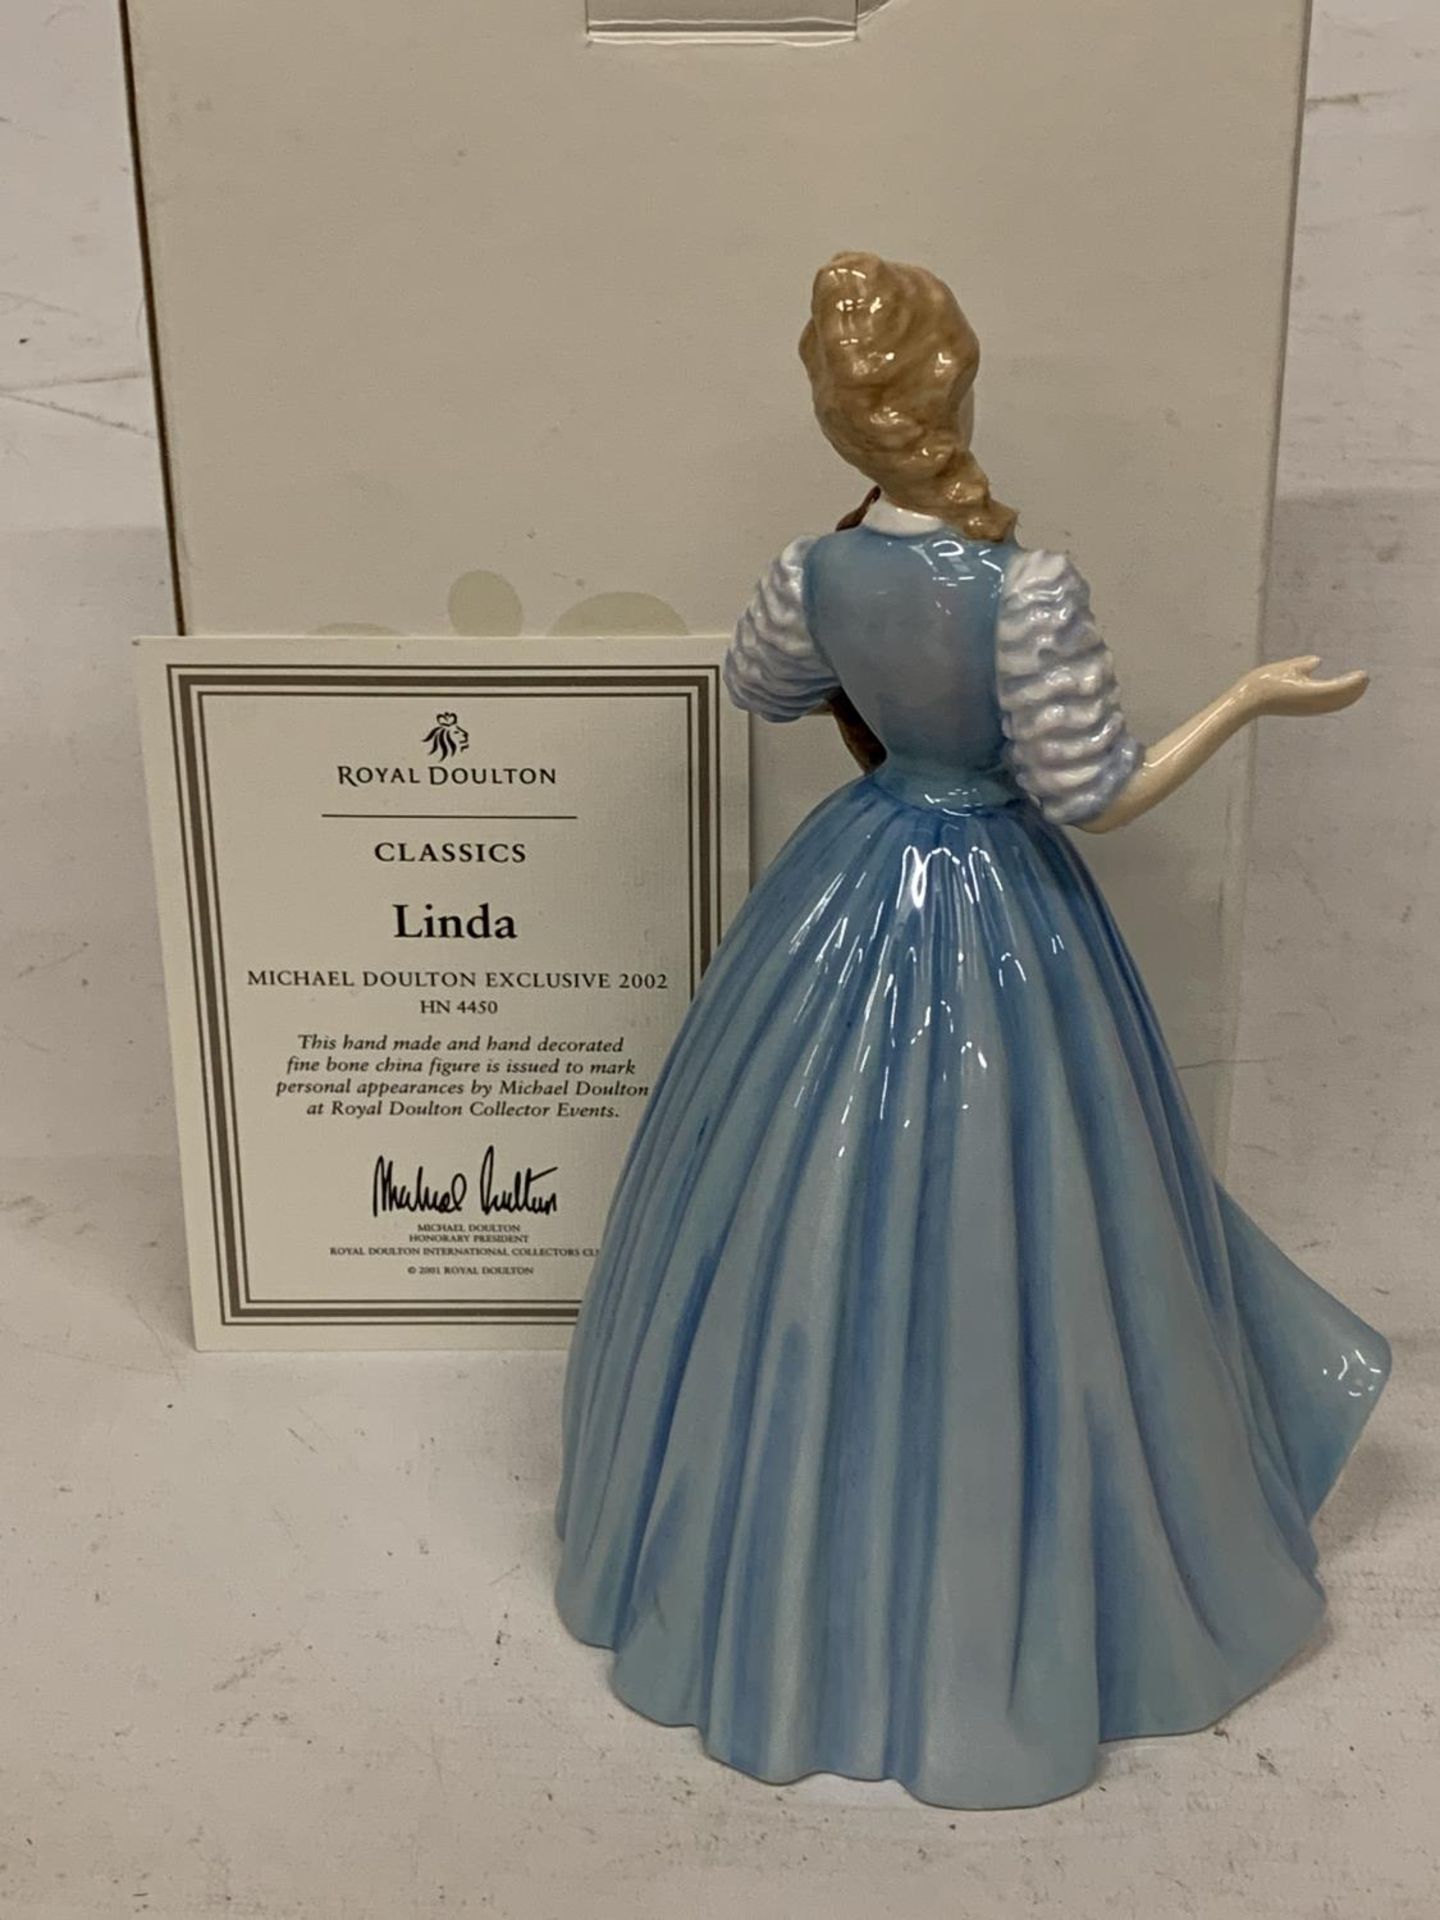 A BOXED ROYAL DOULTON FIGURINE "LINDA" A MICHAEL DOULTON EXCLUSIVE 2002 HN 4450 WITH CERTIFICATE AND - Bild 2 aus 3